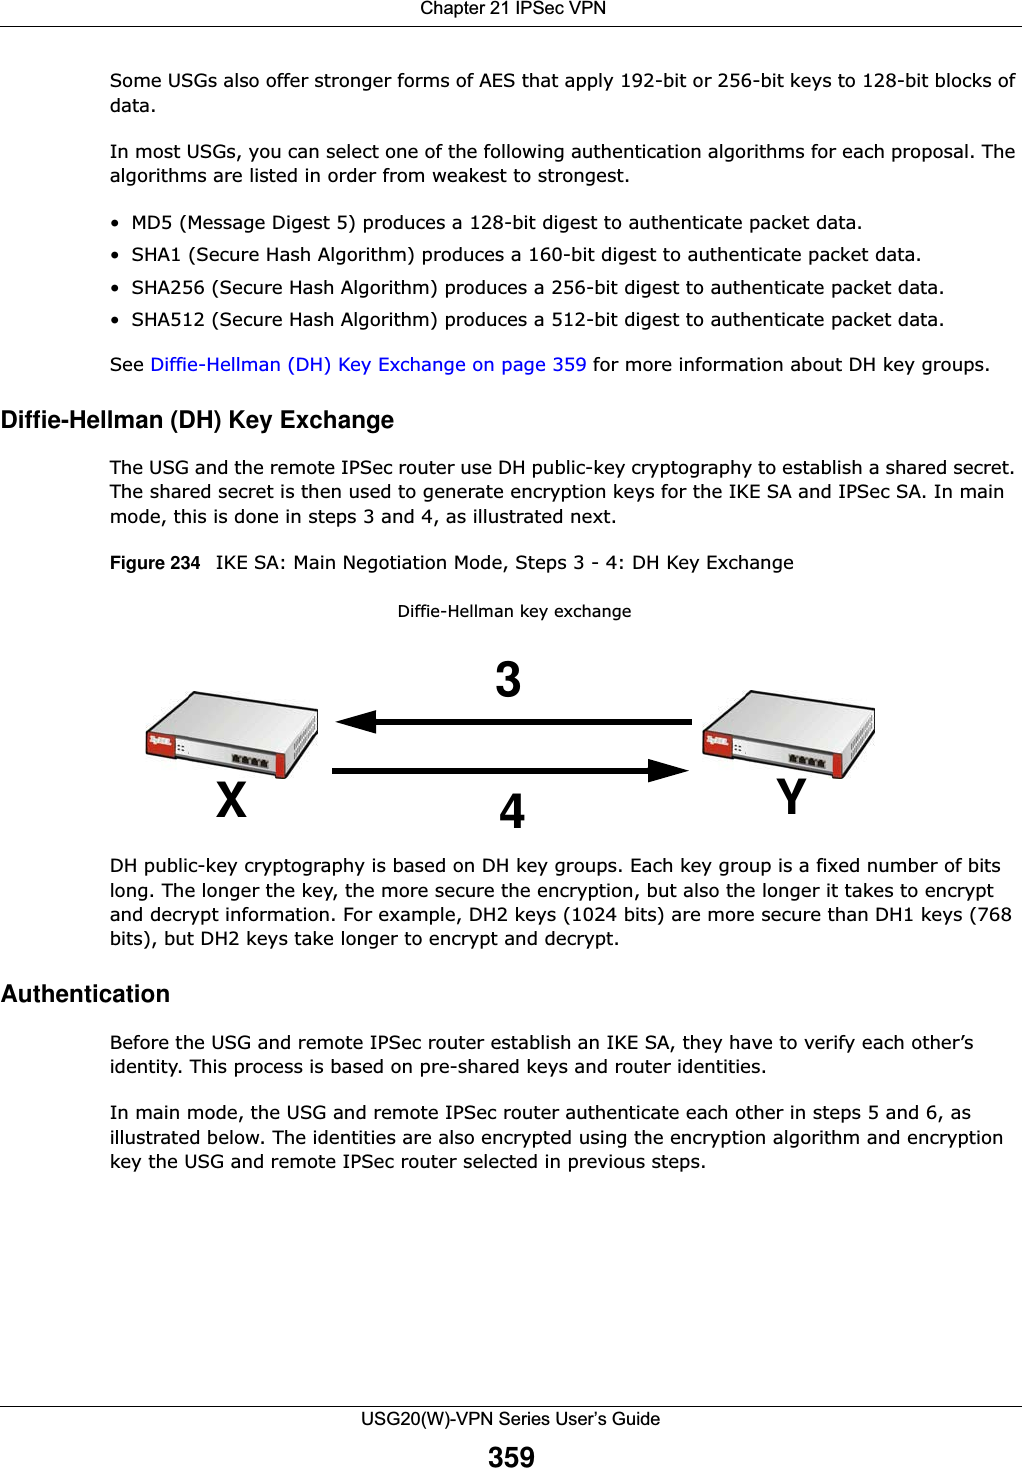  Chapter 21 IPSec VPNUSG20(W)-VPN Series User’s Guide359Some USGs also offer stronger forms of AES that apply 192-bit or 256-bit keys to 128-bit blocks of data.In most USGs, you can select one of the following authentication algorithms for each proposal. The algorithms are listed in order from weakest to strongest.• MD5 (Message Digest 5) produces a 128-bit digest to authenticate packet data.• SHA1 (Secure Hash Algorithm) produces a 160-bit digest to authenticate packet data.• SHA256 (Secure Hash Algorithm) produces a 256-bit digest to authenticate packet data.• SHA512 (Secure Hash Algorithm) produces a 512-bit digest to authenticate packet data.See Diffie-Hellman (DH) Key Exchange on page 359 for more information about DH key groups.Diffie-Hellman (DH) Key ExchangeThe USG and the remote IPSec router use DH public-key cryptography to establish a shared secret. The shared secret is then used to generate encryption keys for the IKE SA and IPSec SA. In main mode, this is done in steps 3 and 4, as illustrated next. Figure 234   IKE SA: Main Negotiation Mode, Steps 3 - 4: DH Key Exchange  DH public-key cryptography is based on DH key groups. Each key group is a fixed number of bits long. The longer the key, the more secure the encryption, but also the longer it takes to encrypt and decrypt information. For example, DH2 keys (1024 bits) are more secure than DH1 keys (768 bits), but DH2 keys take longer to encrypt and decrypt.AuthenticationBefore the USG and remote IPSec router establish an IKE SA, they have to verify each other’s identity. This process is based on pre-shared keys and router identities.In main mode, the USG and remote IPSec router authenticate each other in steps 5 and 6, as illustrated below. The identities are also encrypted using the encryption algorithm and encryption key the USG and remote IPSec router selected in previous steps.Diffie-Hellman key exchange34XY